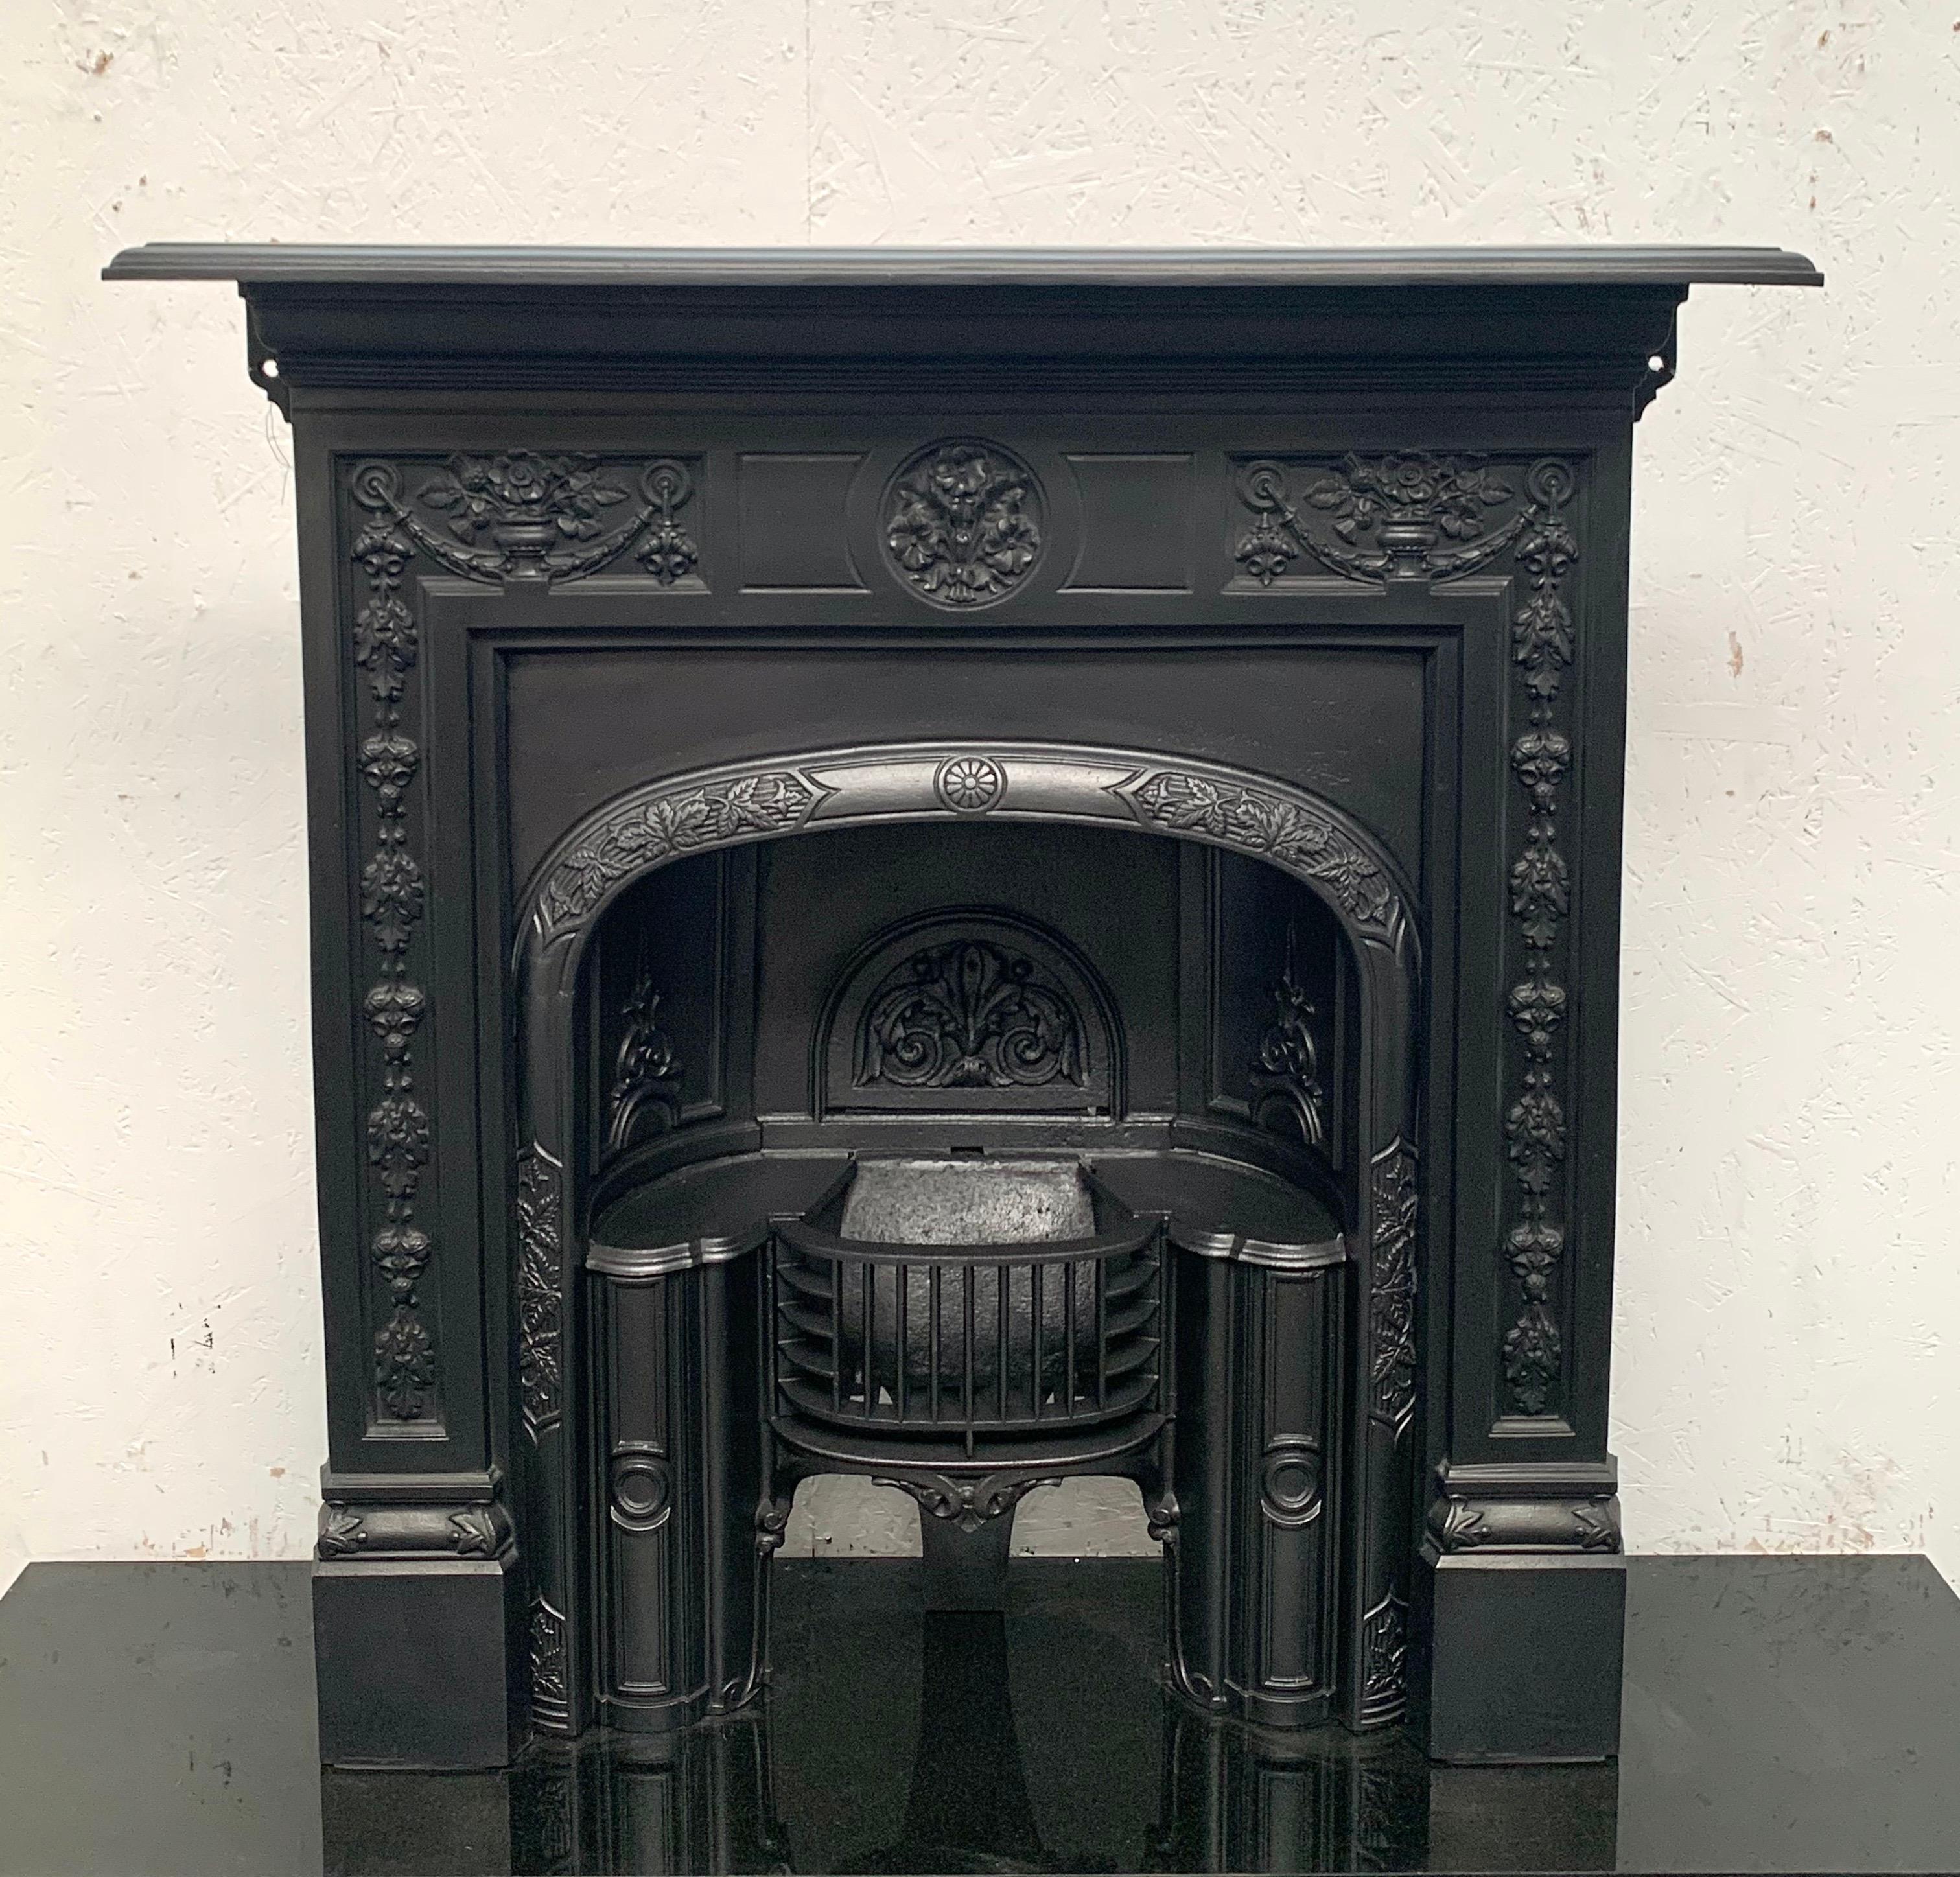 19th century original Victorian cast iron fireplace combionation surround with insert
Traditional blackened finish. British made with good cating details.
Shelf 42